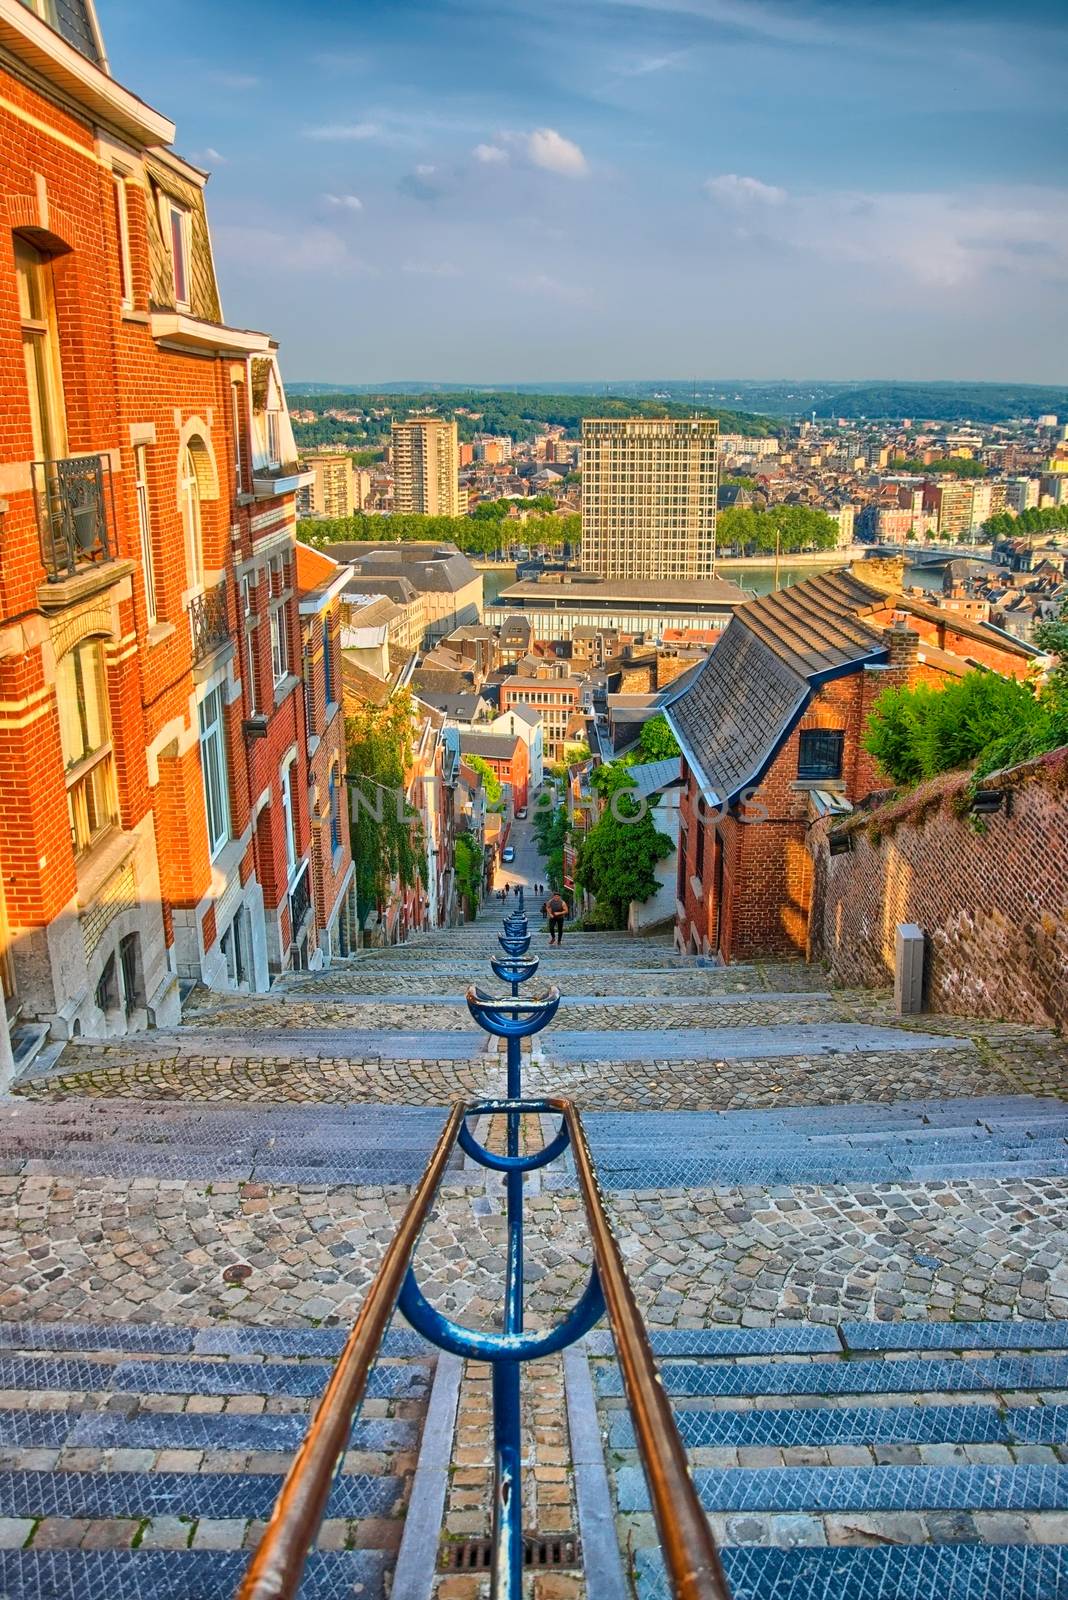 View over montagne de beuren stairway with red brick houses in L by Eagle2308